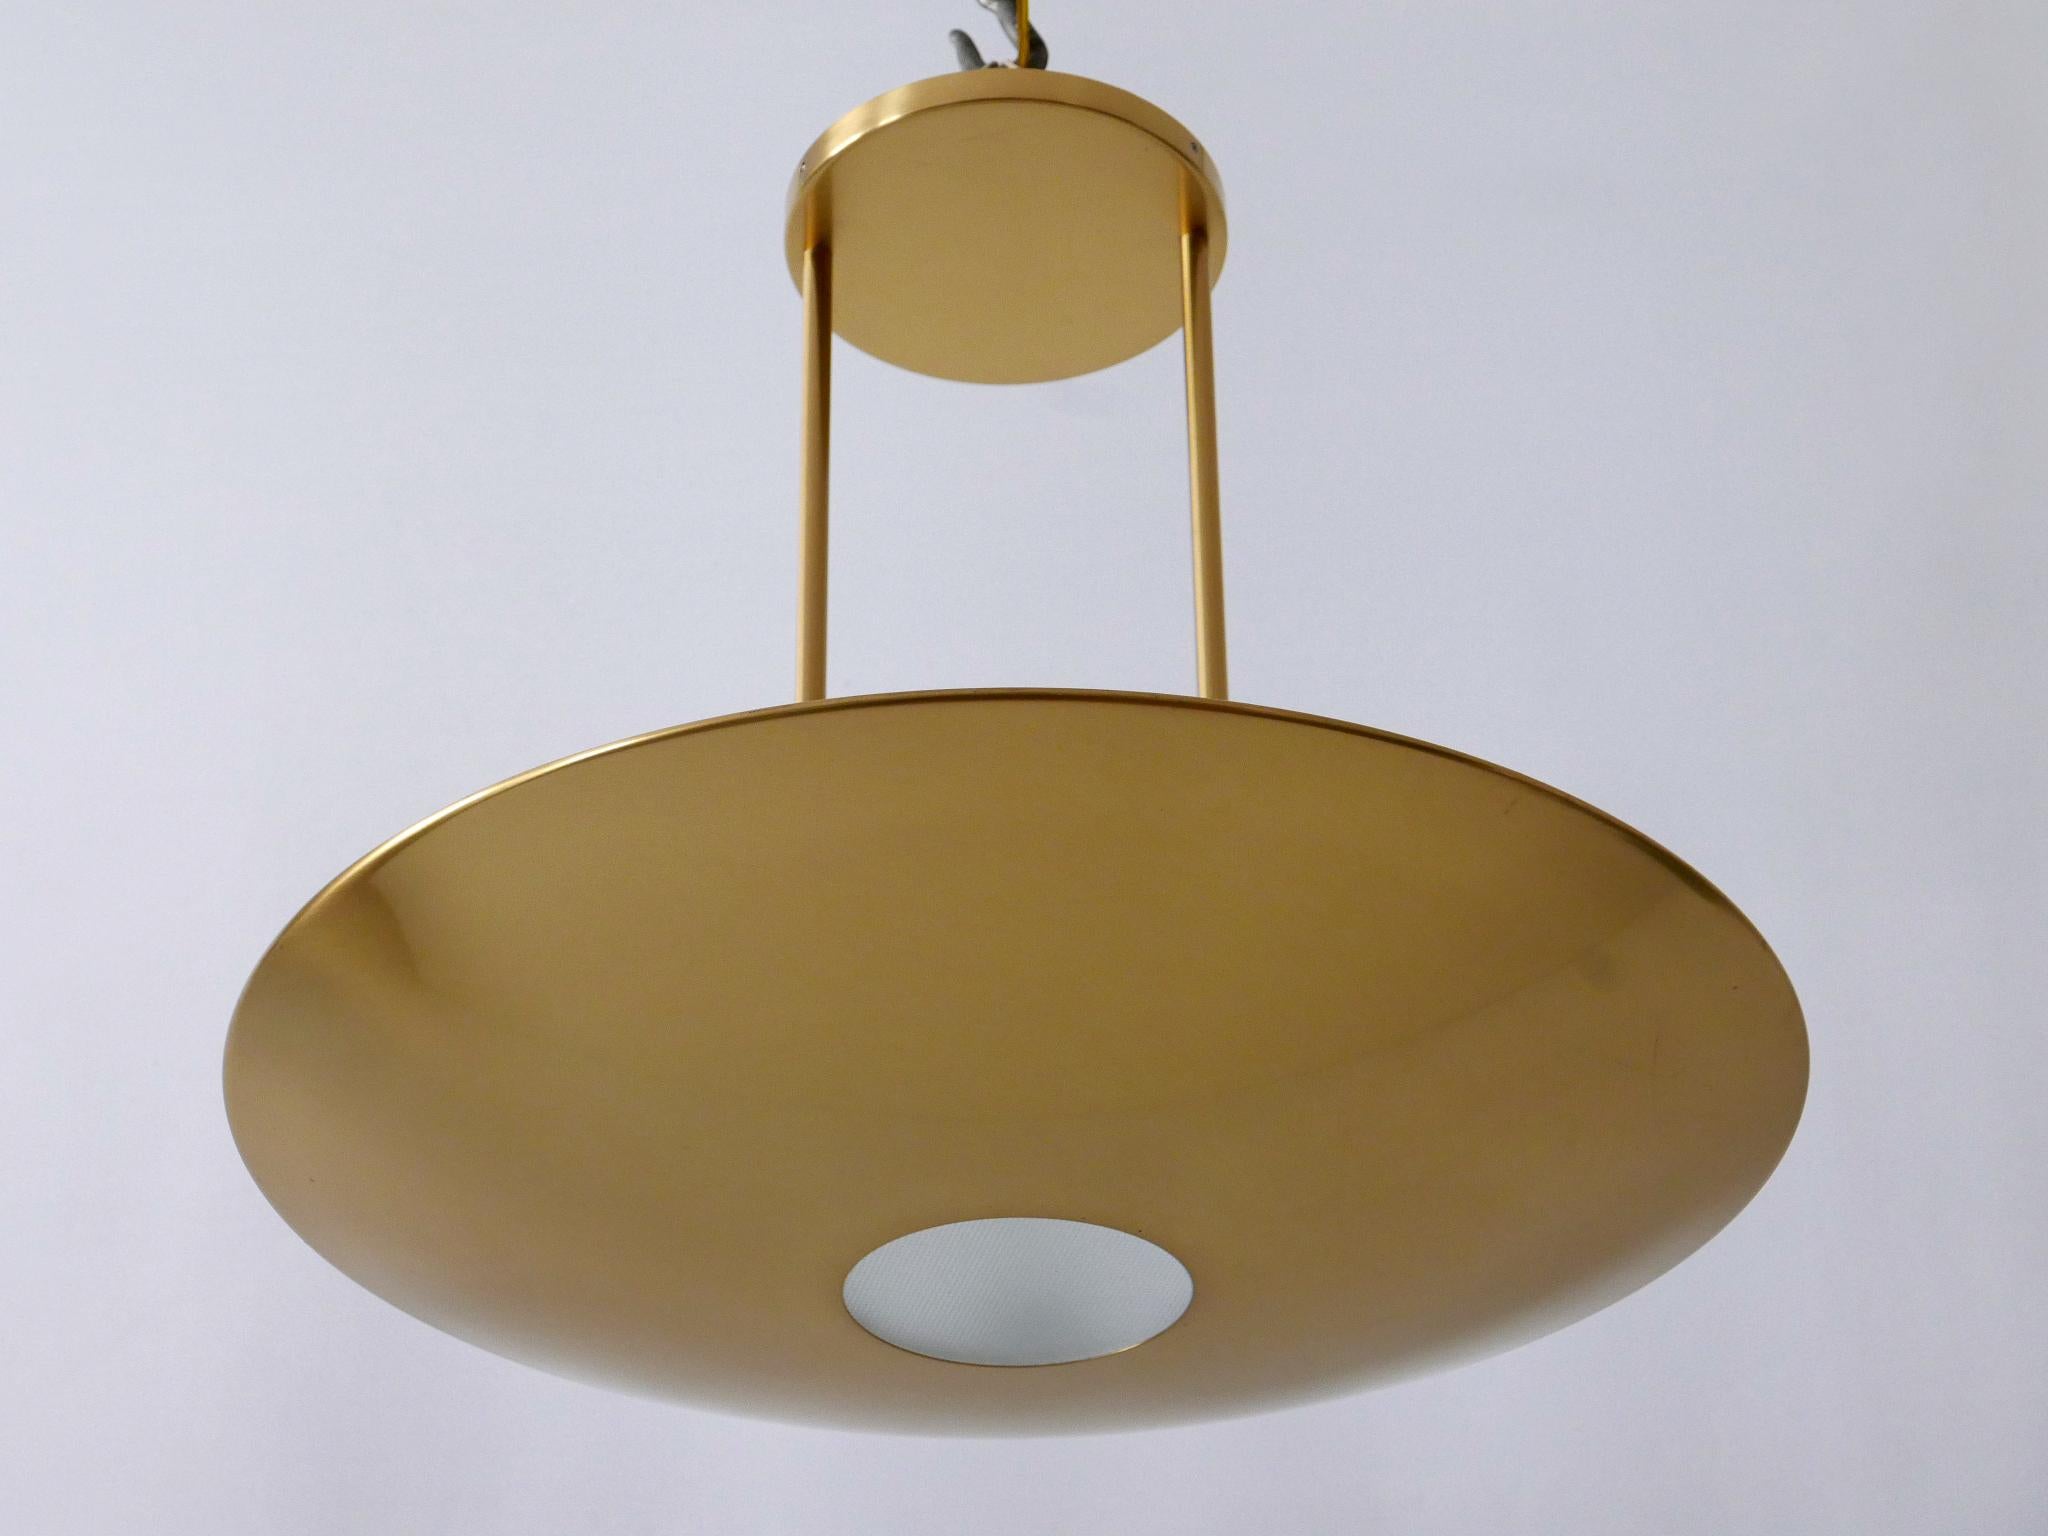 Late 20th Century Modernist Brass Pendant Lamp or Ceiling Fixture by Florian Schulz Germany 1980s